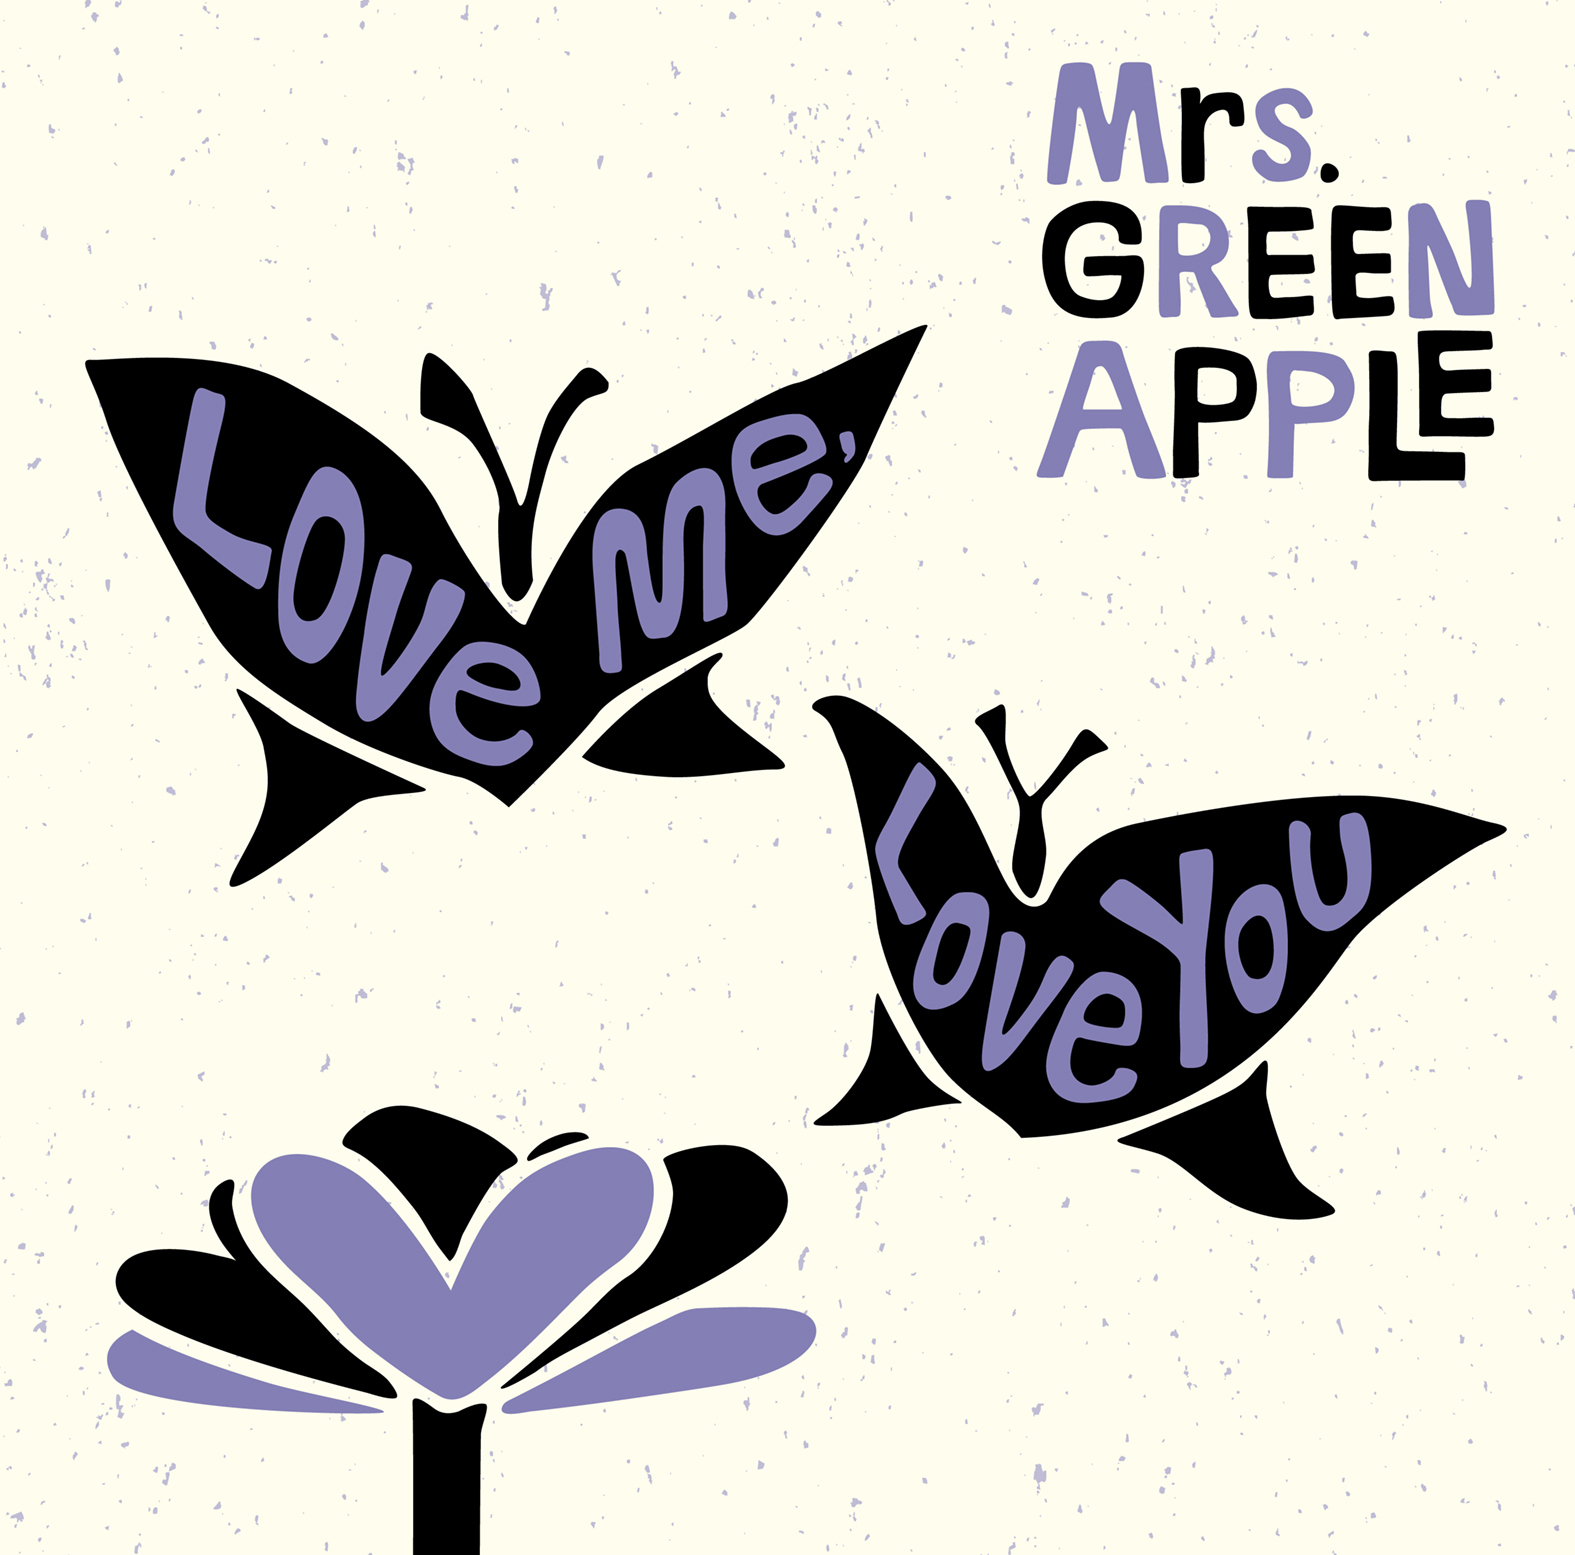 Love me, Love you (初回限定盤) -Mrs.GREEN APPLE OFFICIAL SITE 